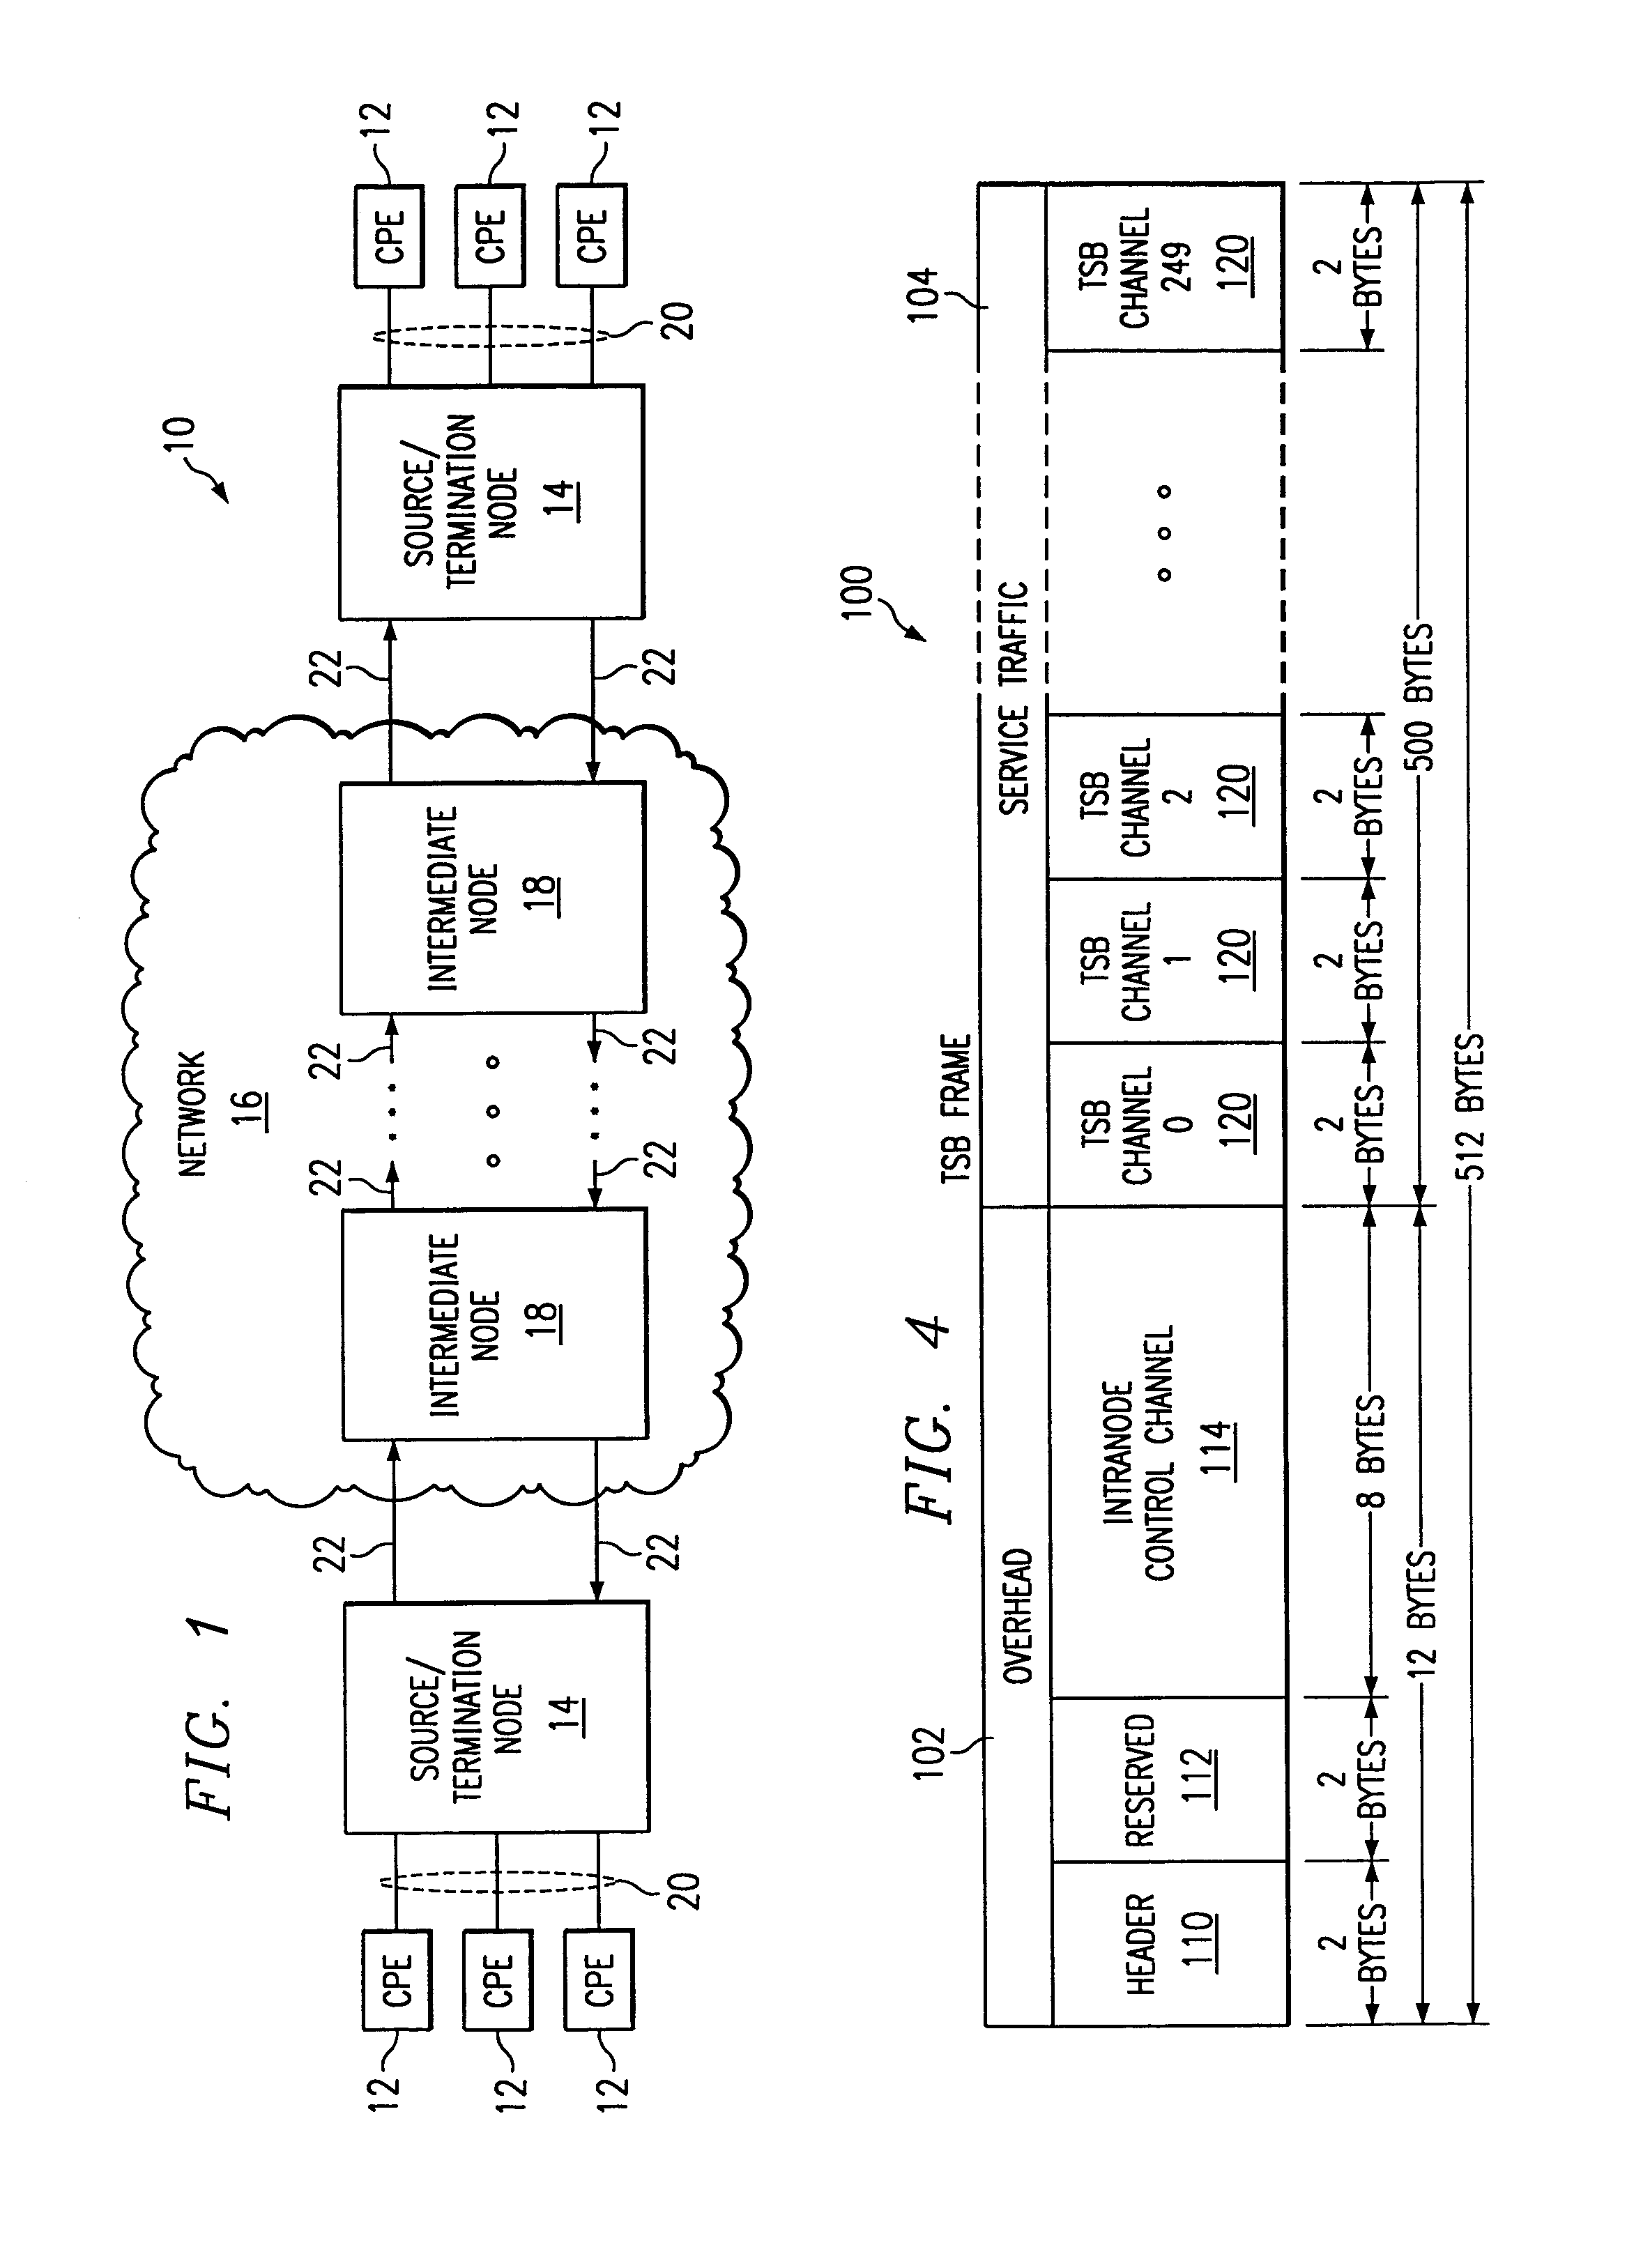 Asynchronous transfer mode (ATM) switch and method for switching ATM traffic